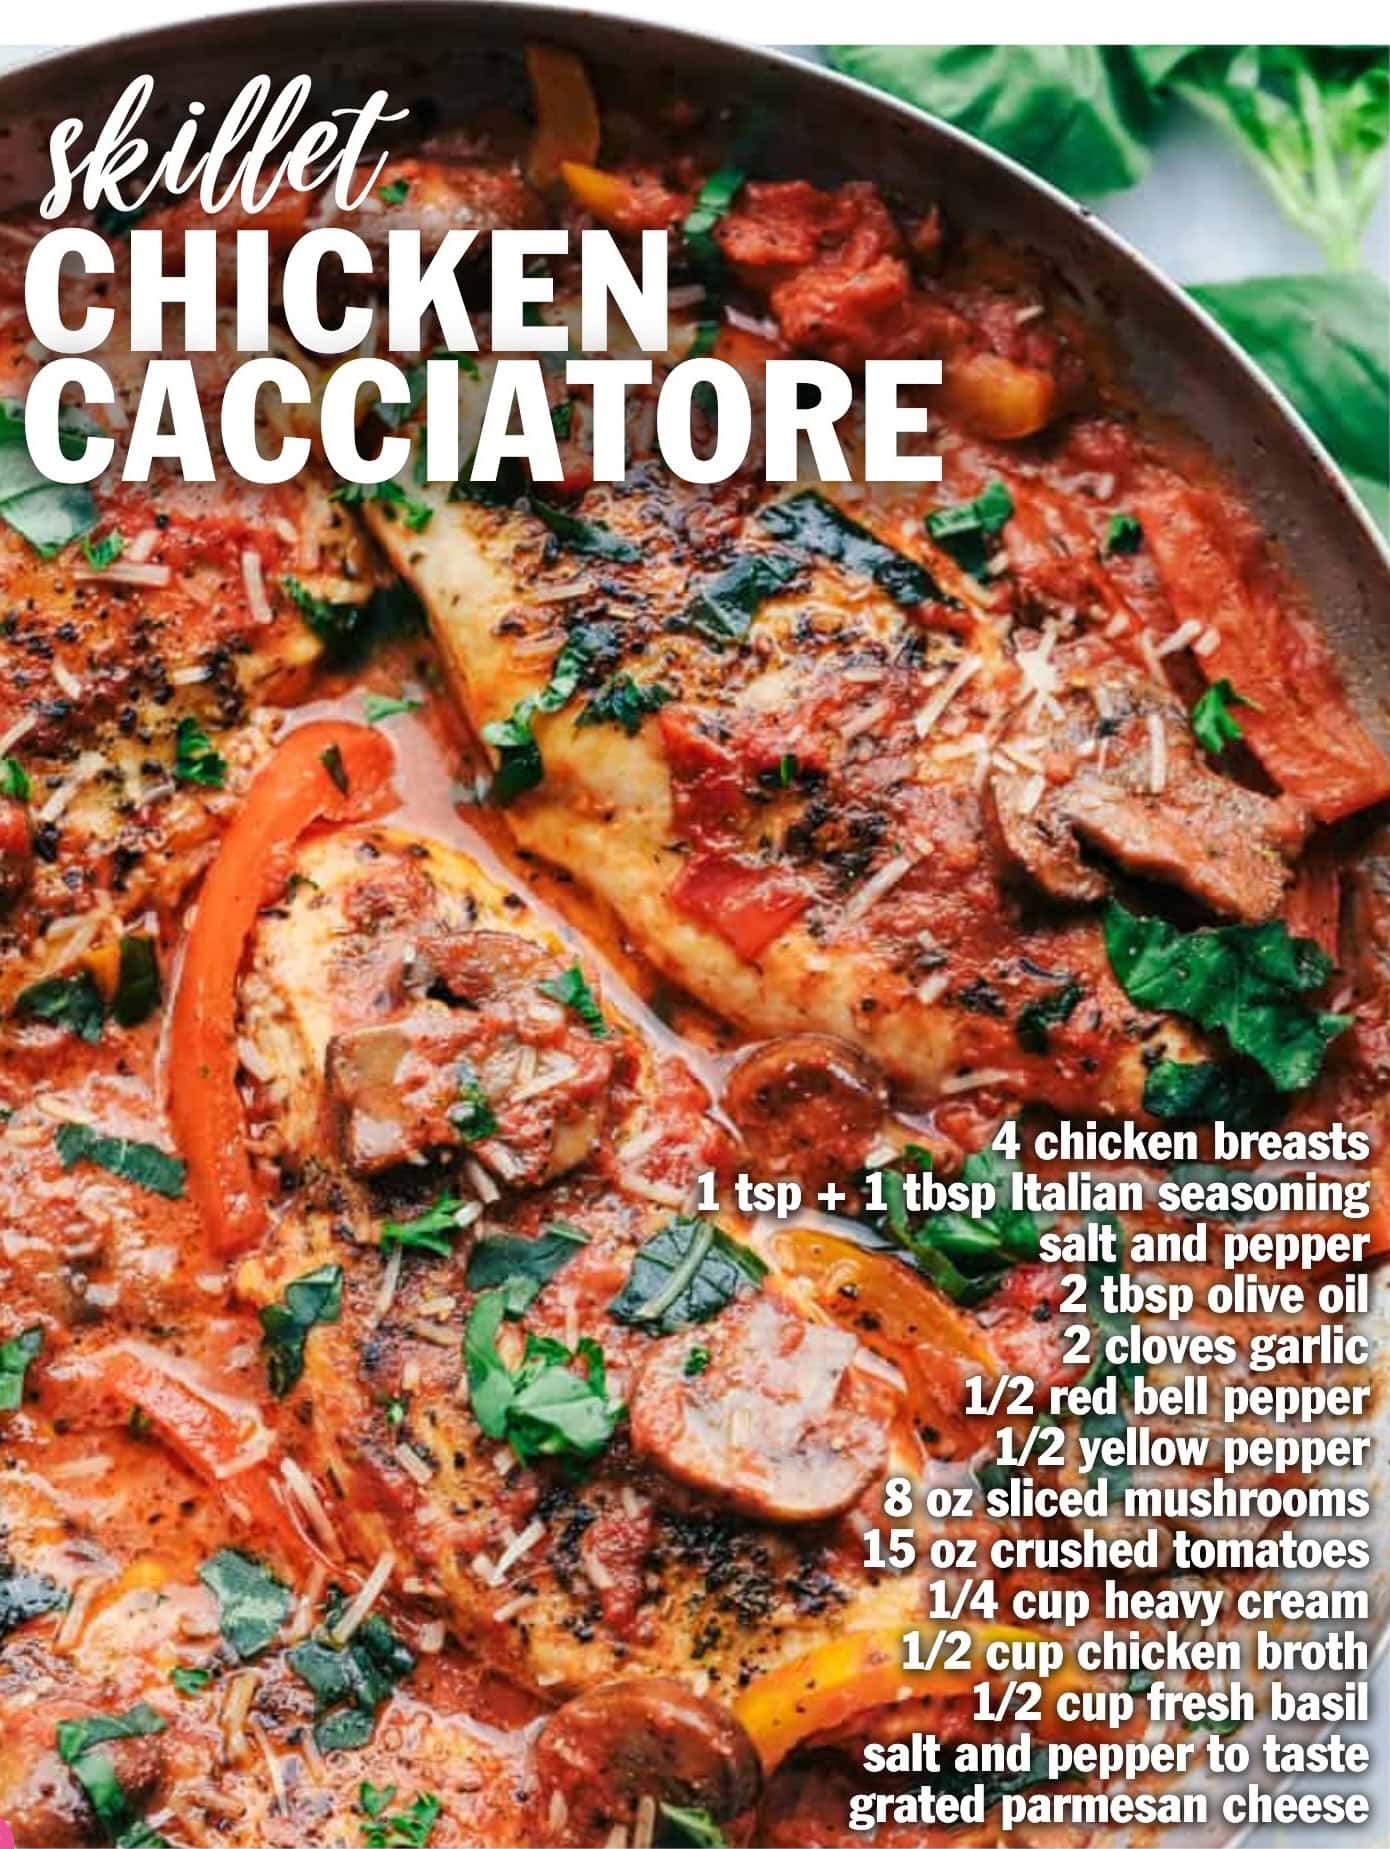 A close-up image of skillet chicken cacciatore, garnished with fresh basil and grated parmesan cheese, alongside a list of ingredients and measurements. Perfect for busy families looking for easy dinner ideas